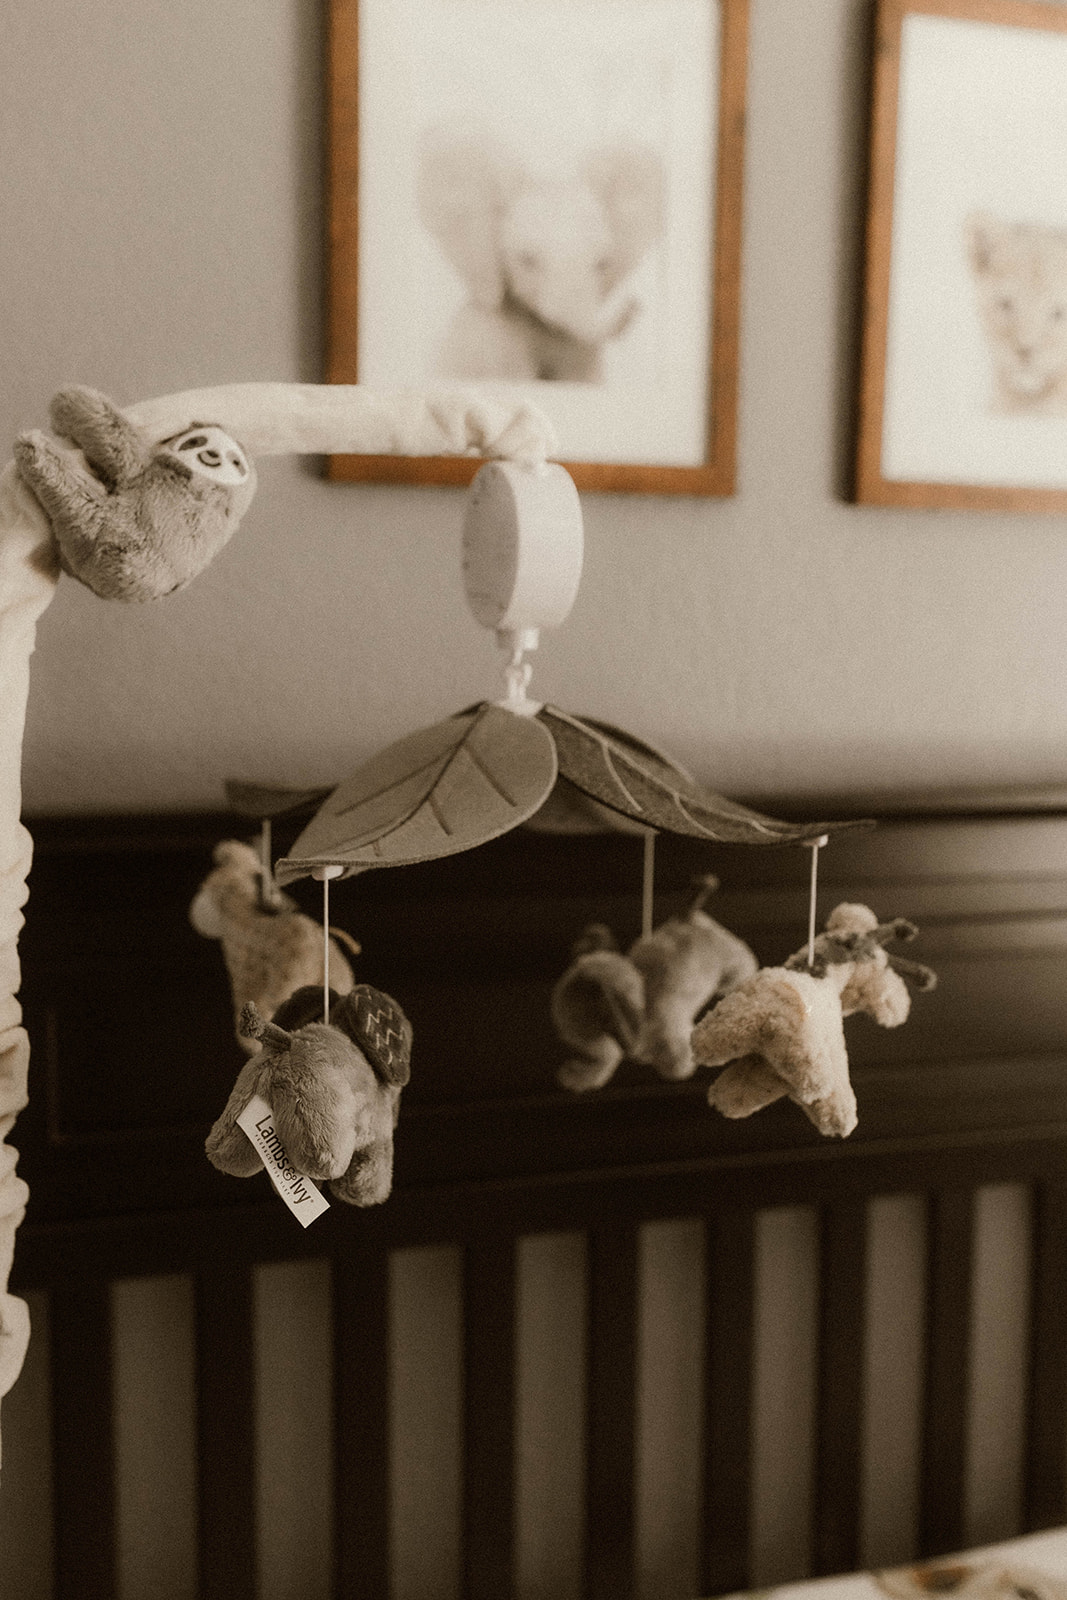 A detail shot of the animal themed mobile above his crib!